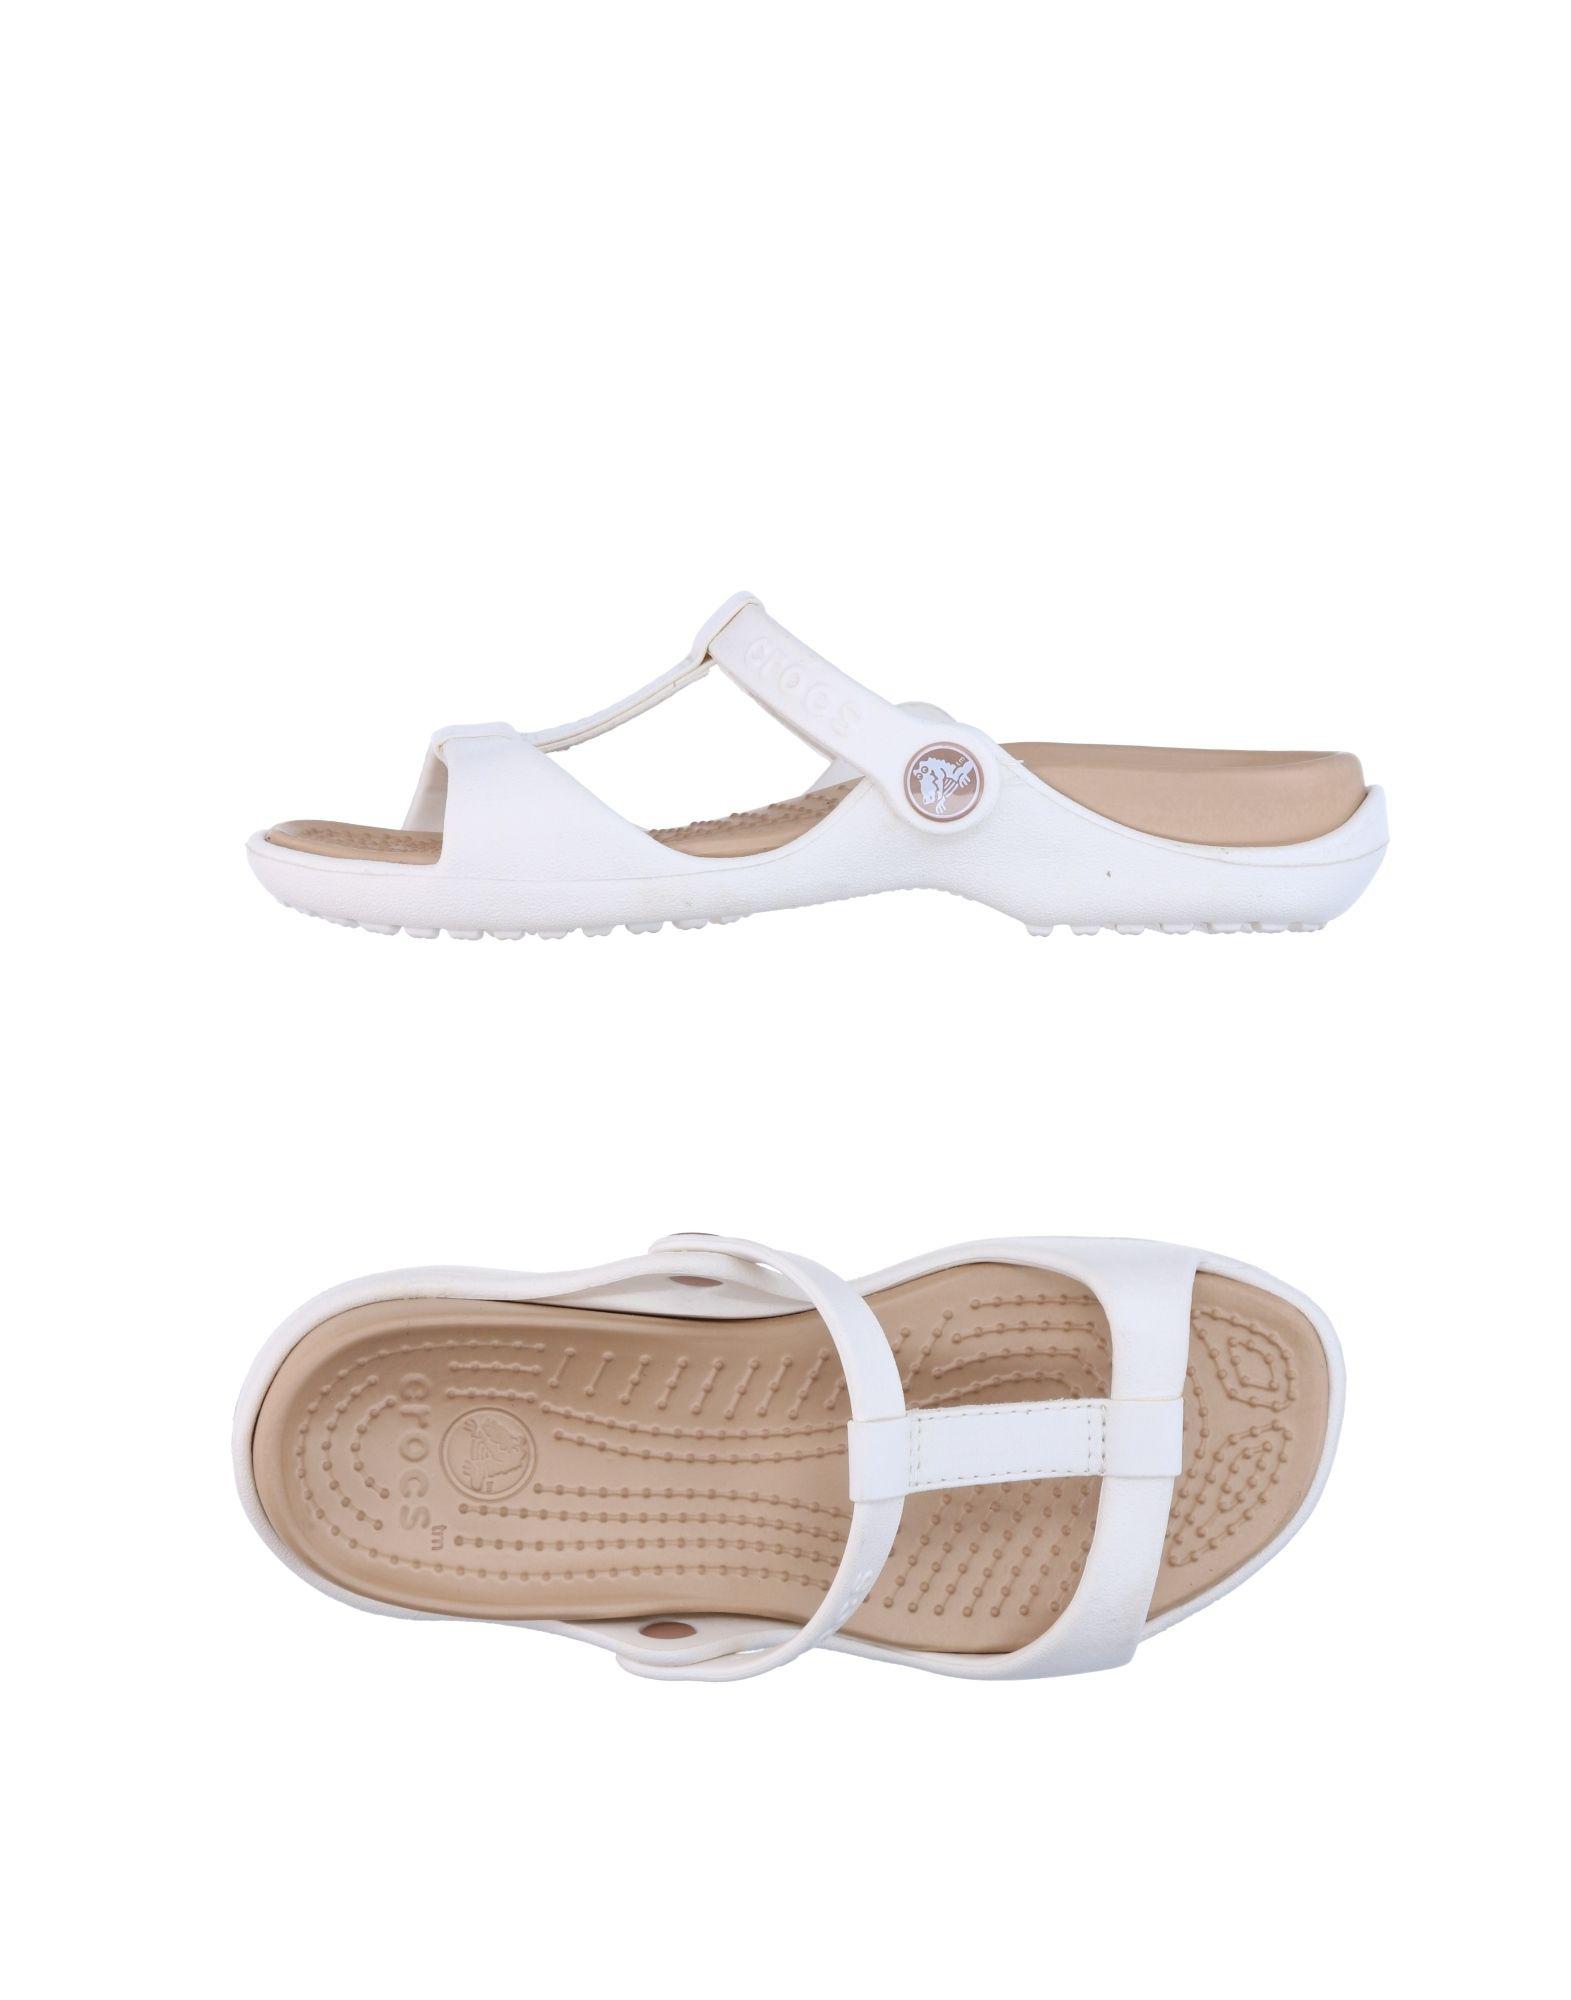  Crocs   Rubber Sandals  in White  Lyst